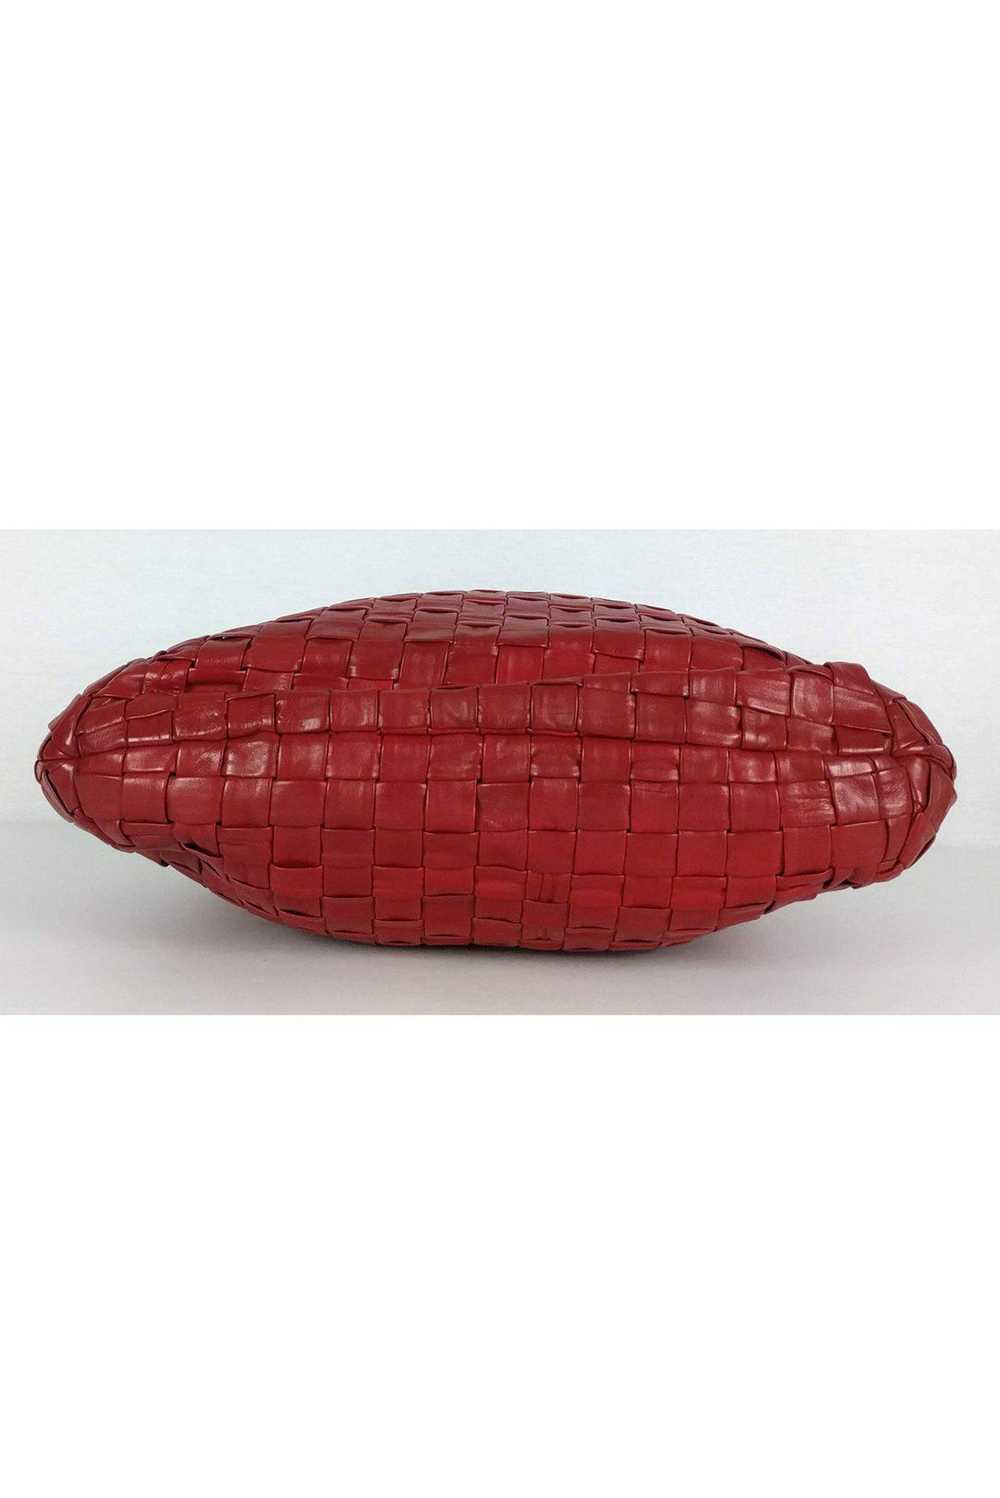 Marc Jacobs - Red Leather Elsa Woven Bag - image 4